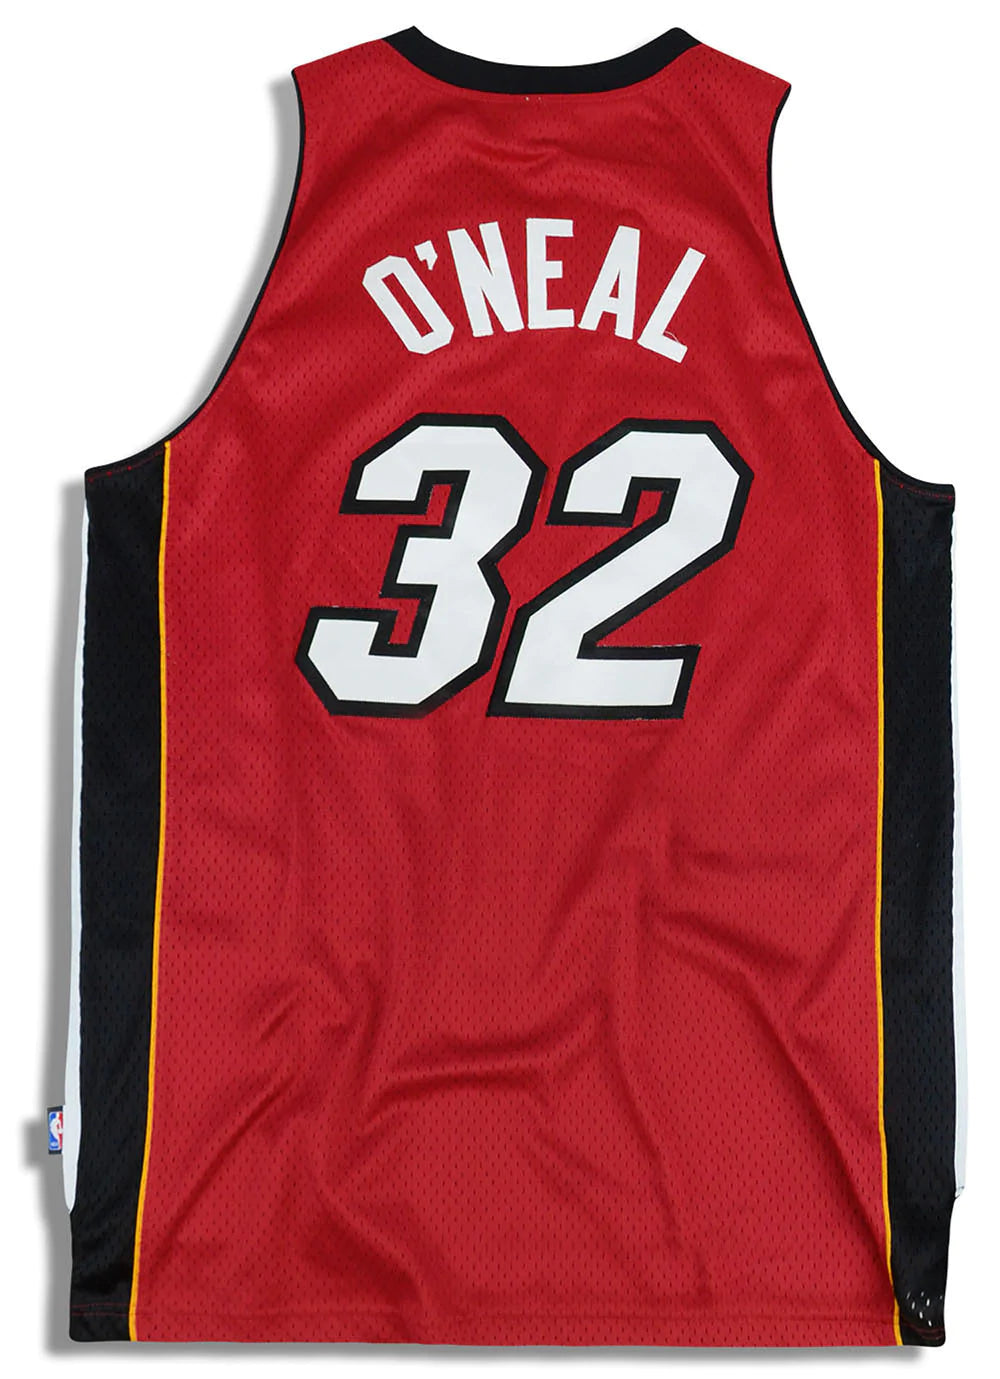 Shaquille Oneal Miami Heat Vintage Basketball Jersey Mens XL 